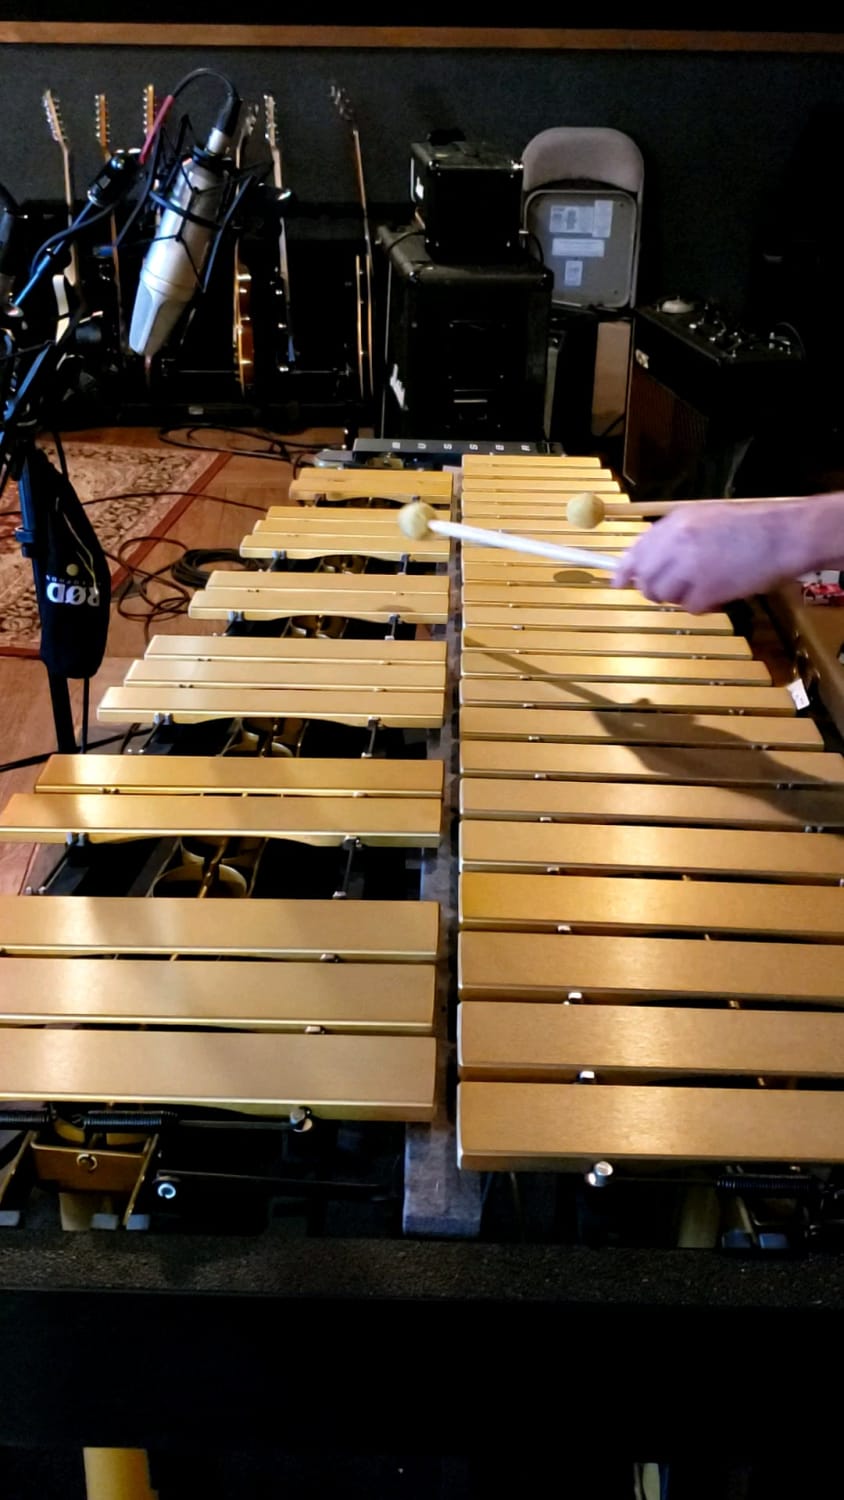 Such soothing tones from the vibraphone!